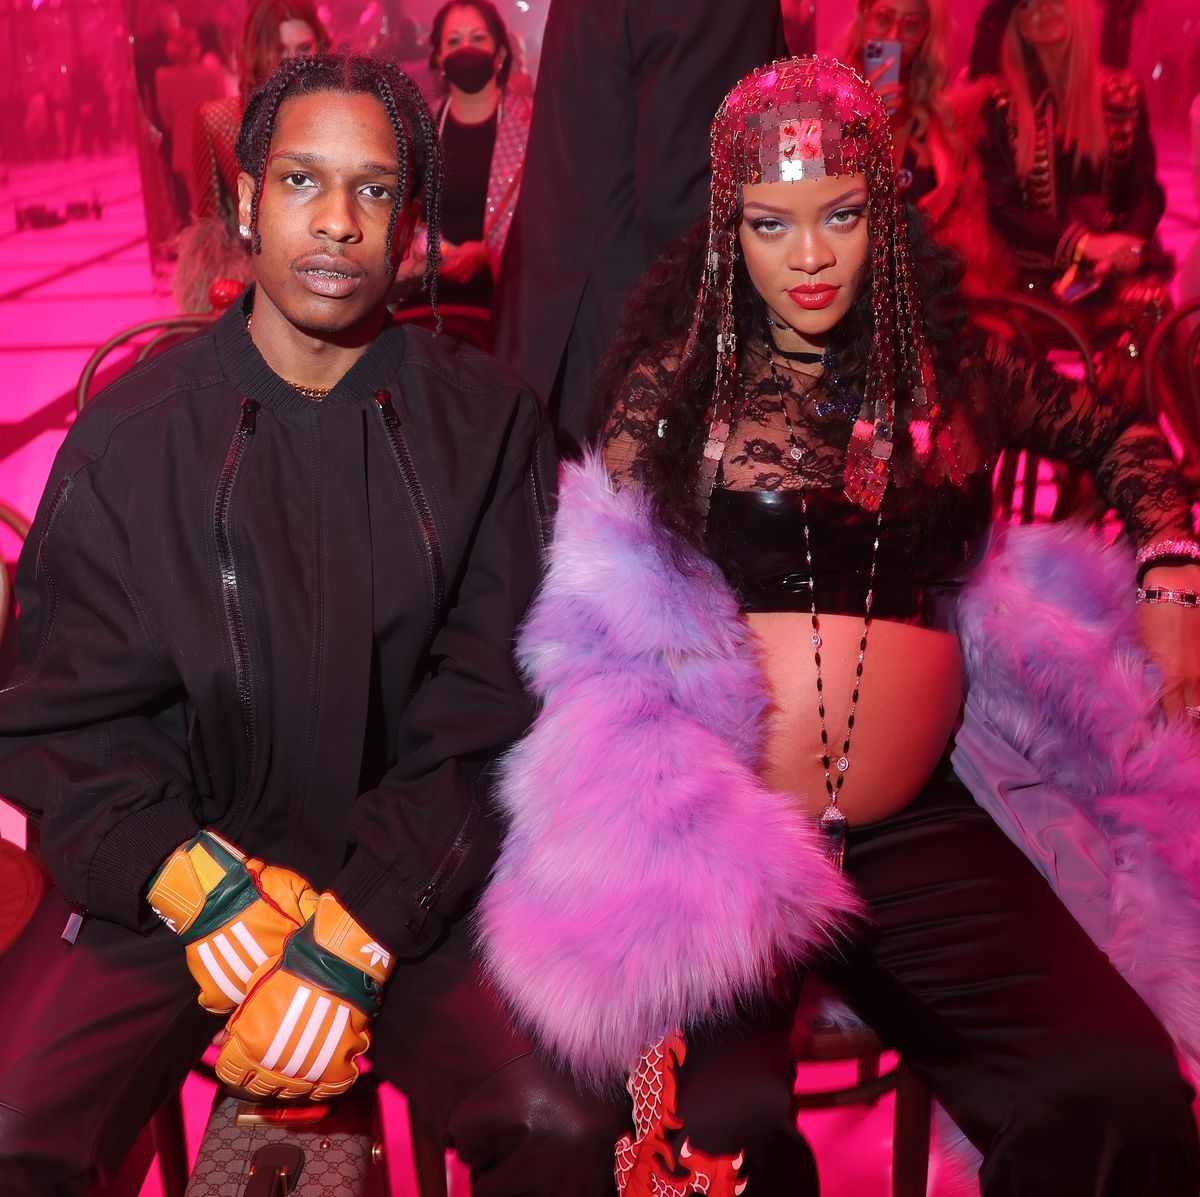 Are Rihanna, ASAP Rocky Married? Plans Amid Baby No. 1